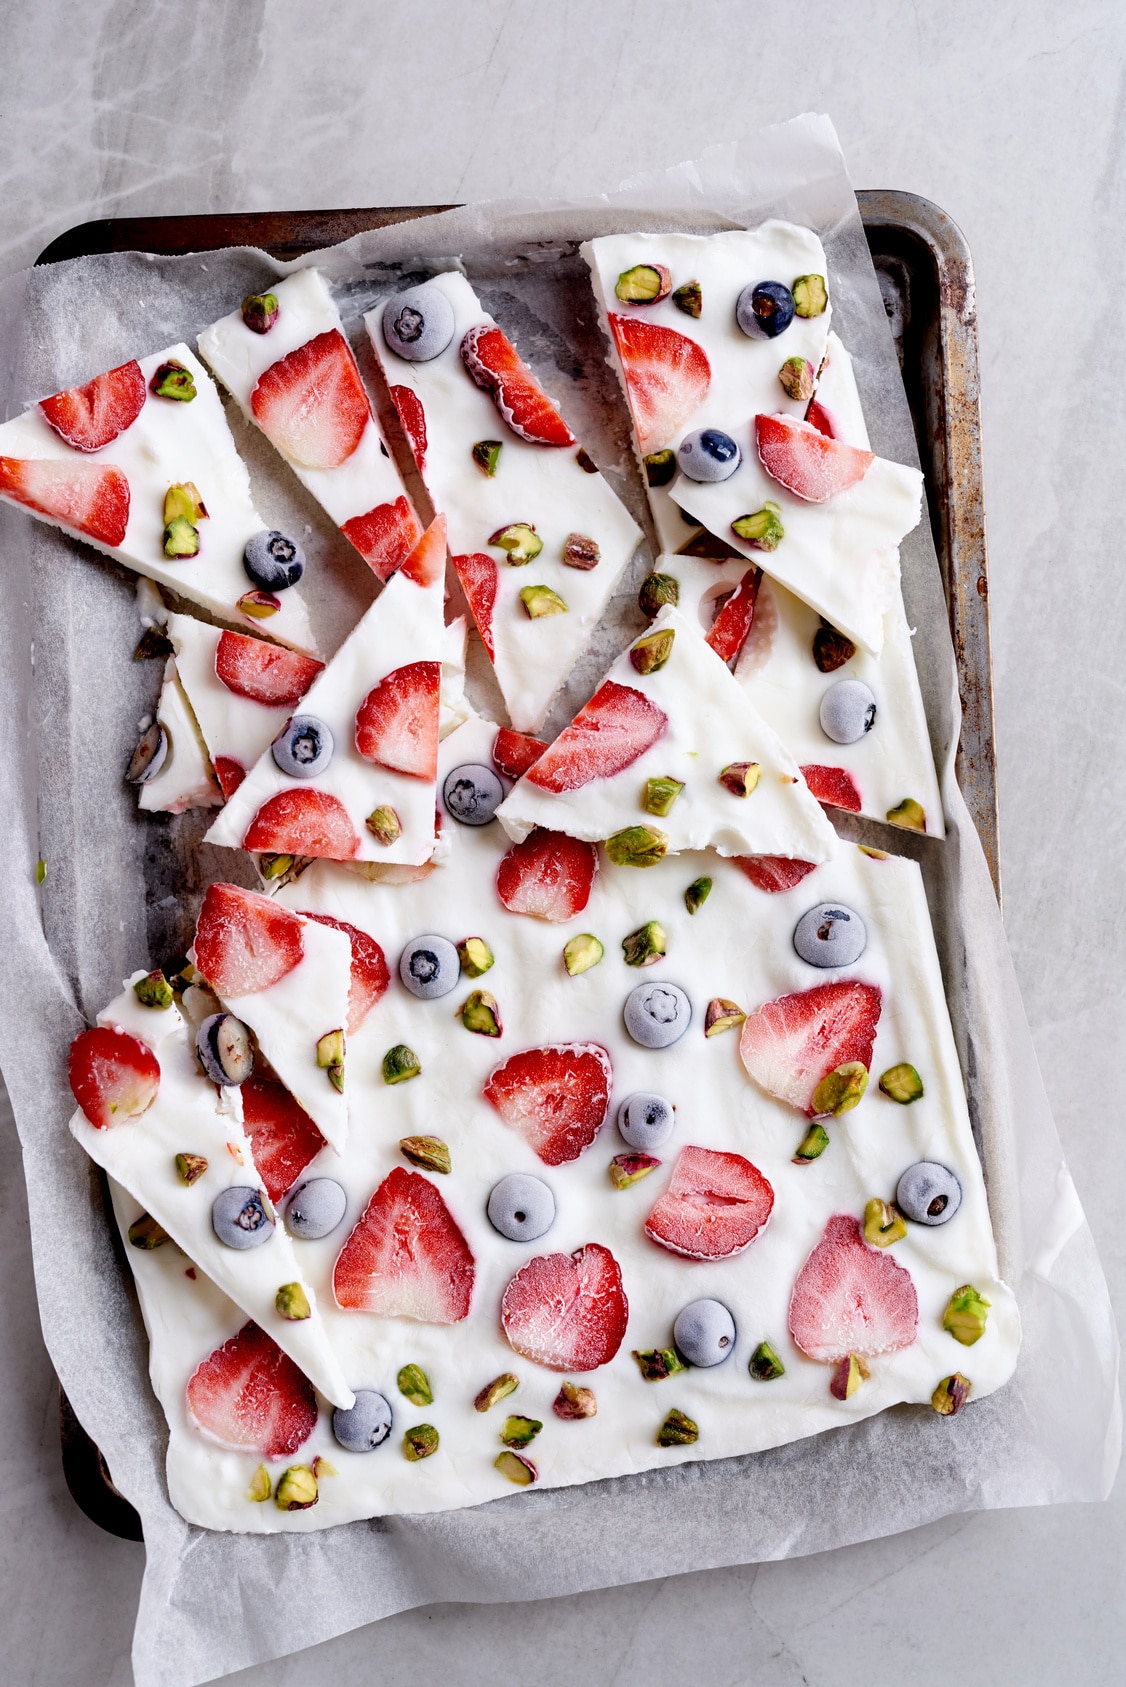 Frozen yogurt bark with strawberries, blueberries and pistachios on a parchment-lined baking sheet